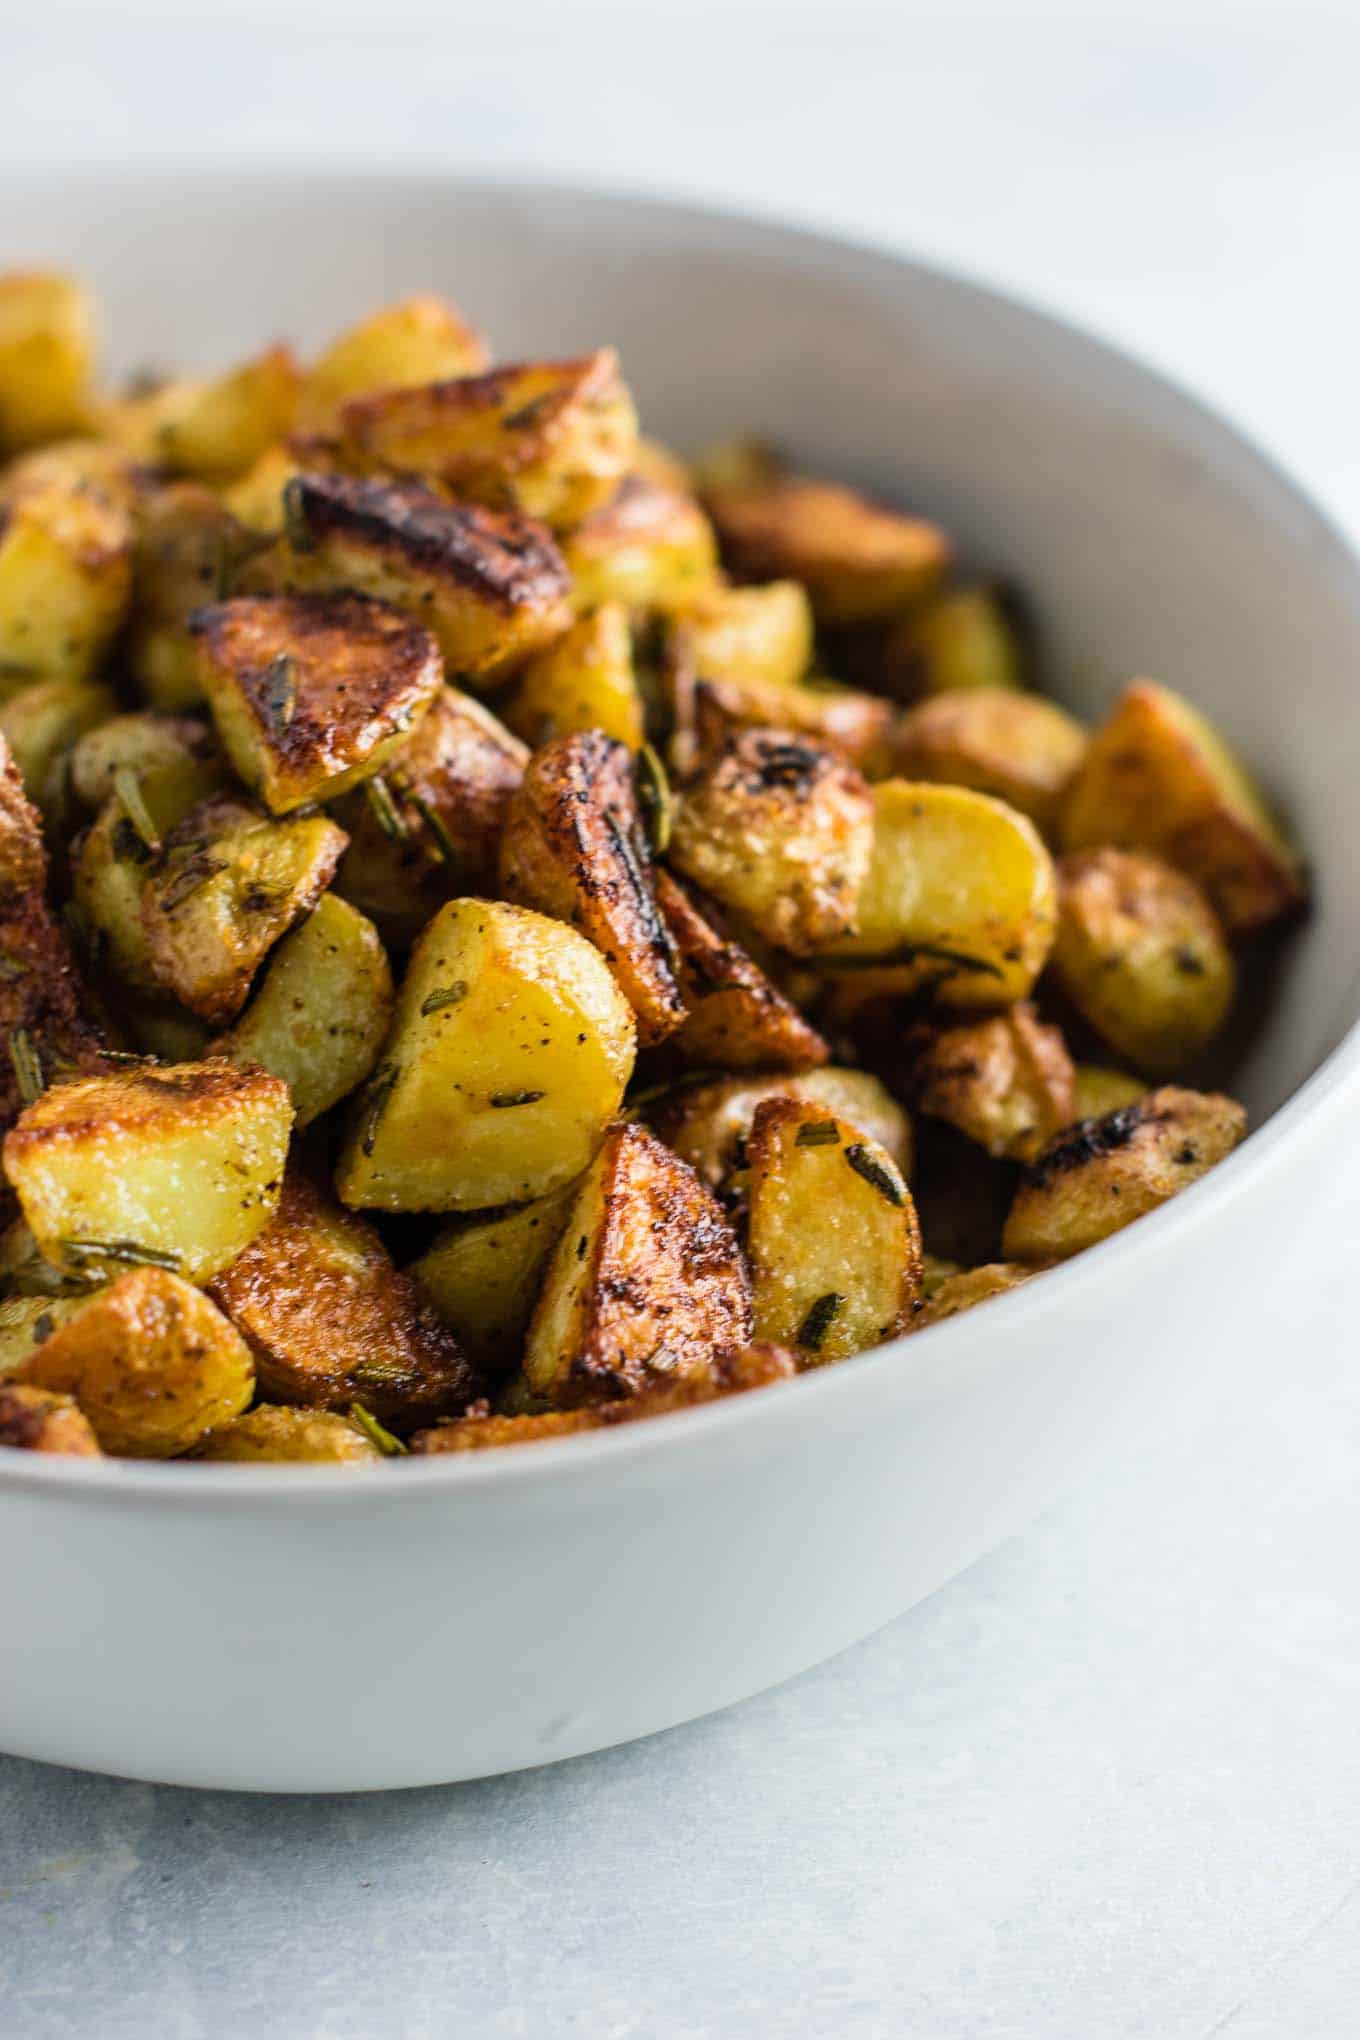 vegan dinner recipes - Rosemary roasted potatoes recipe made with fresh rosemary and olive oil. Everyone will love this easy side dish! #rosemaryroastedpotatoes #vegan #sidedish #roastedpotatoes